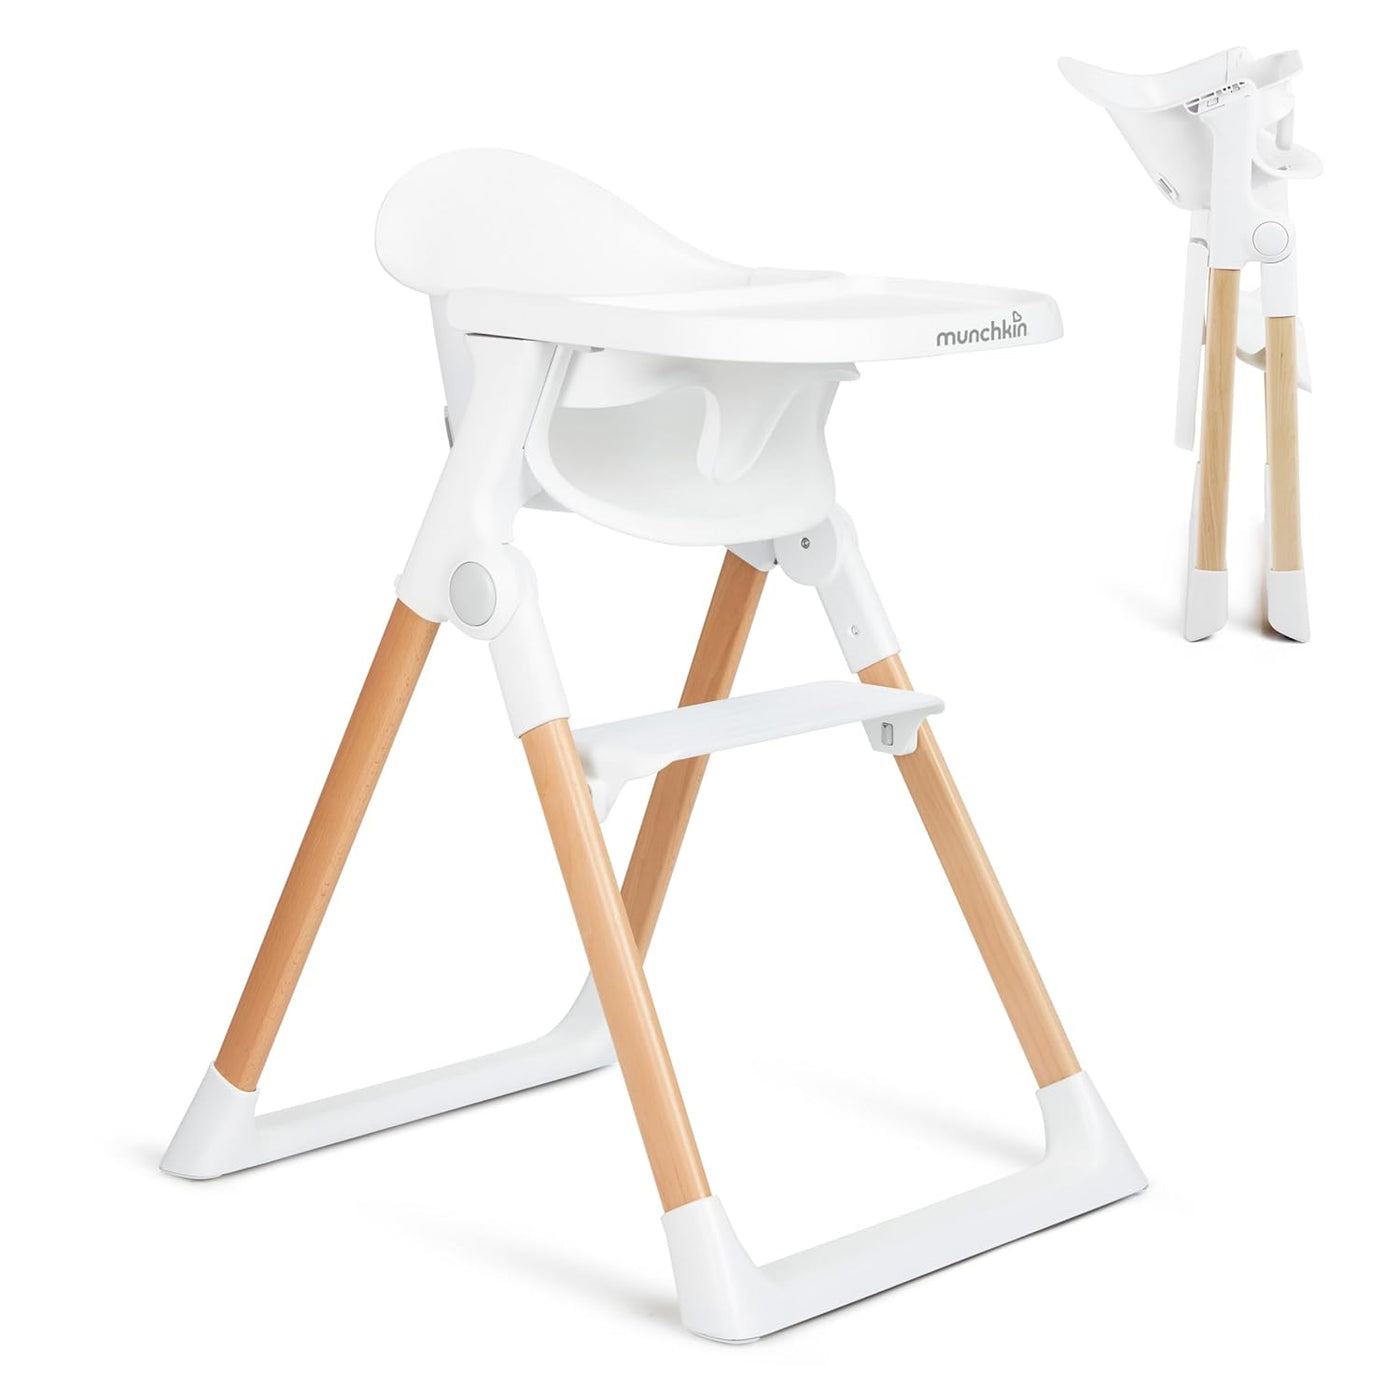 Munchkin Float Foldable Baby and Toddler High Chair